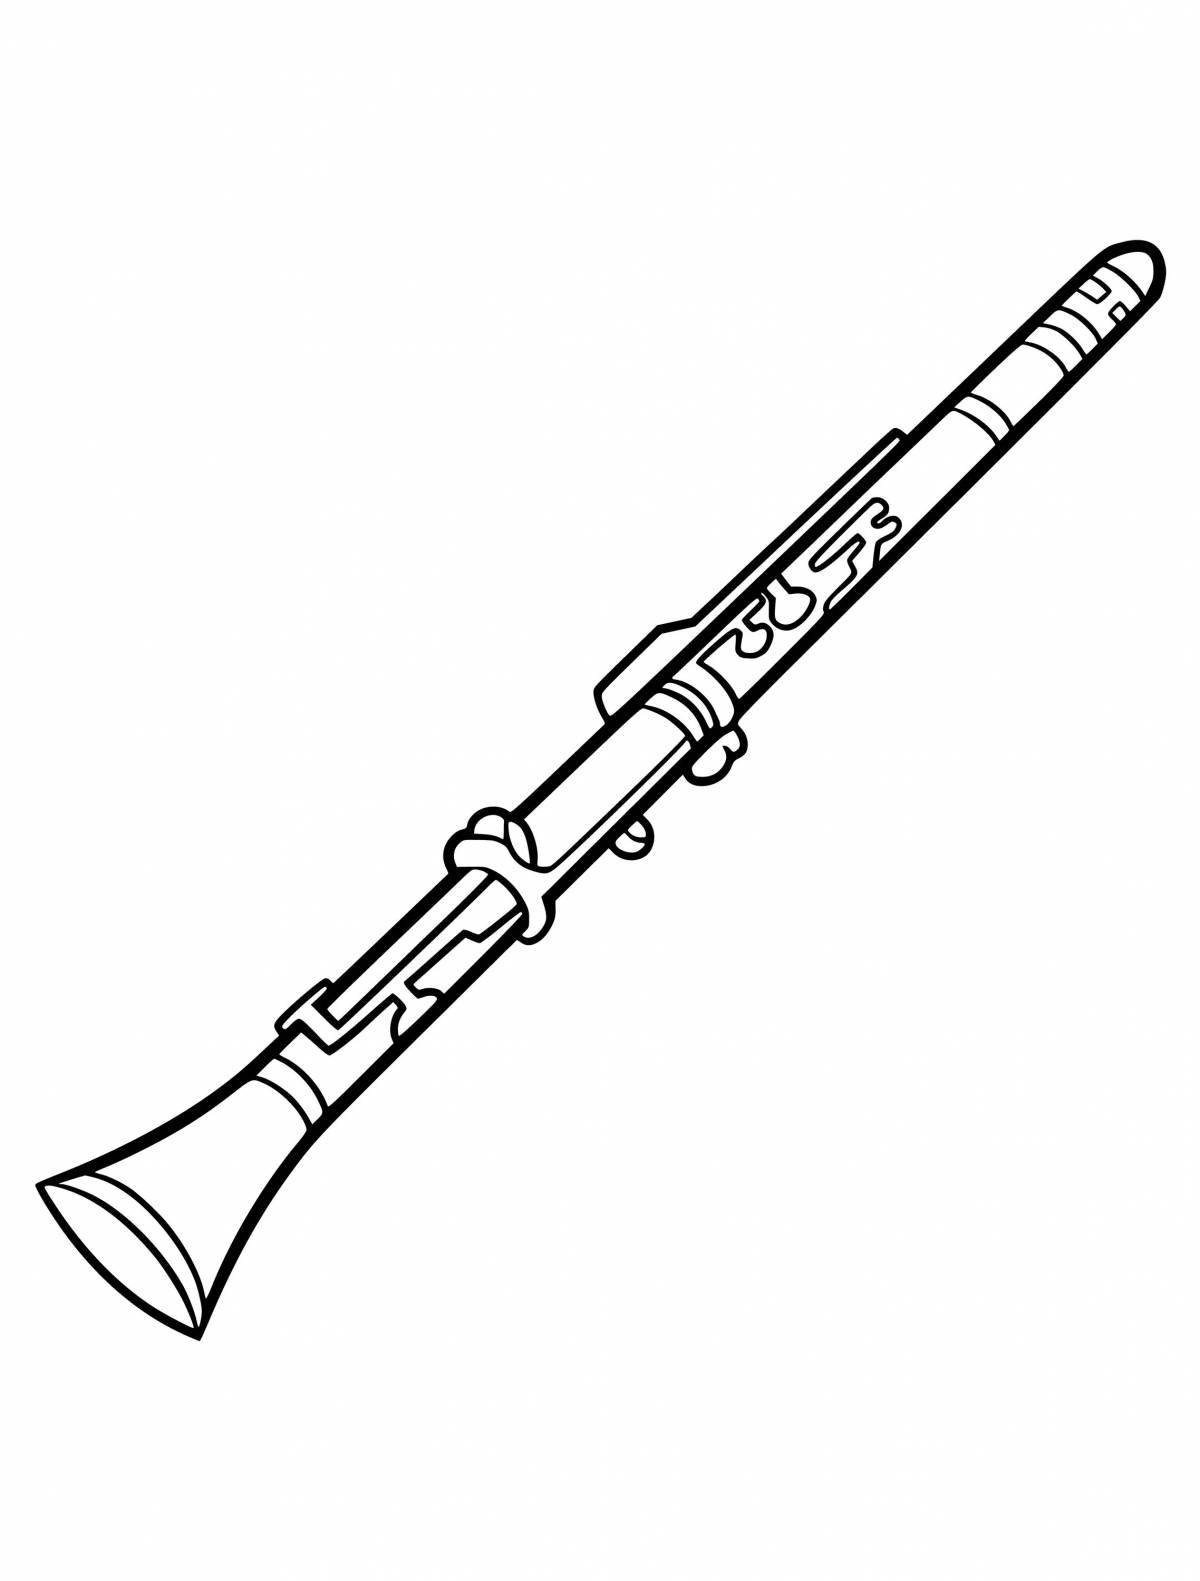 Musical instrument joyous coloring page